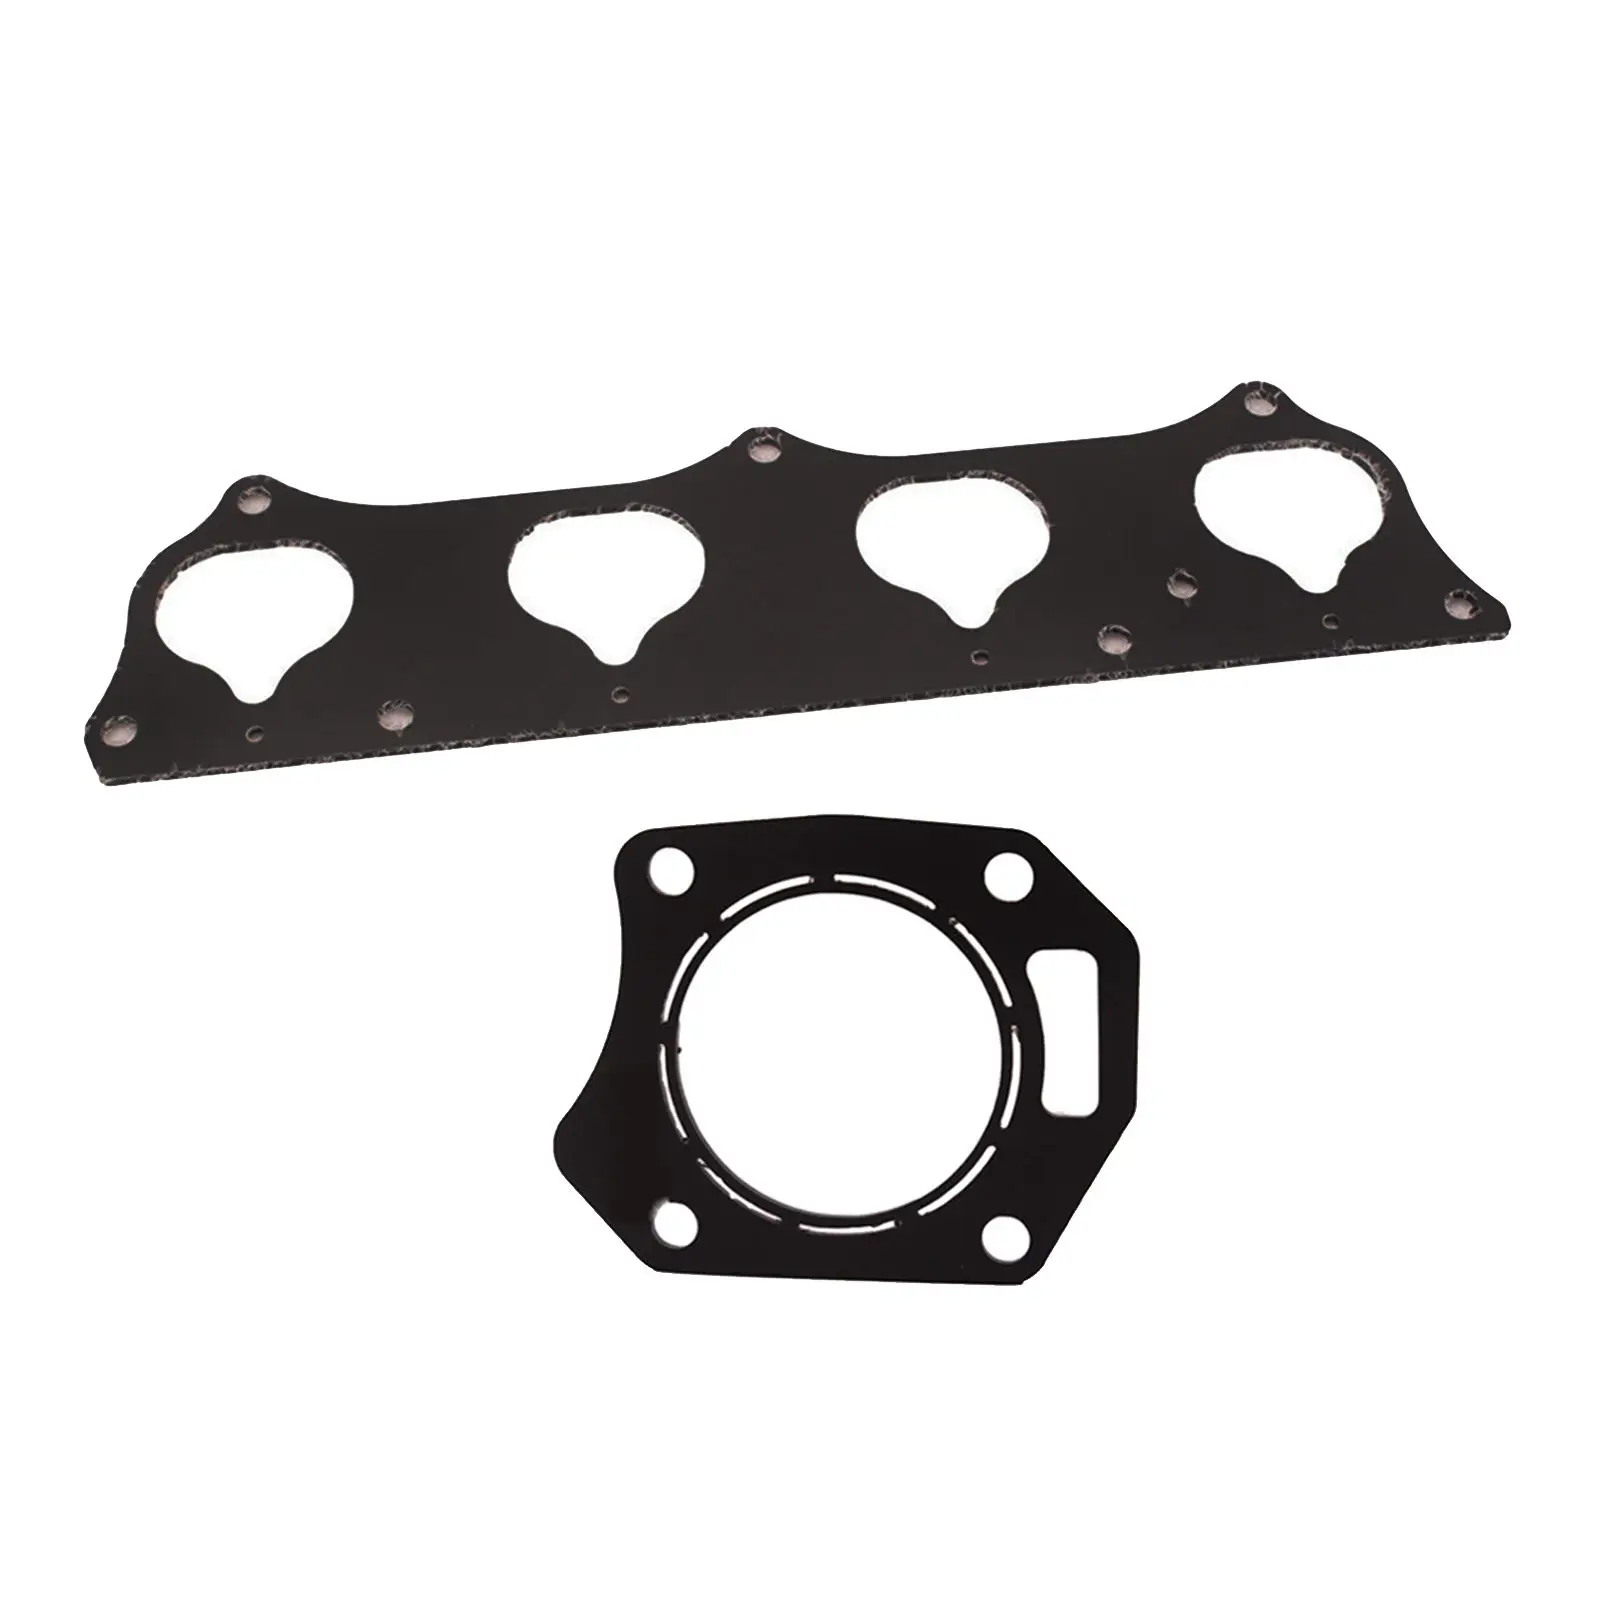 Intake Manifold Gasket Throttle Body Gasket for  Si And Acura